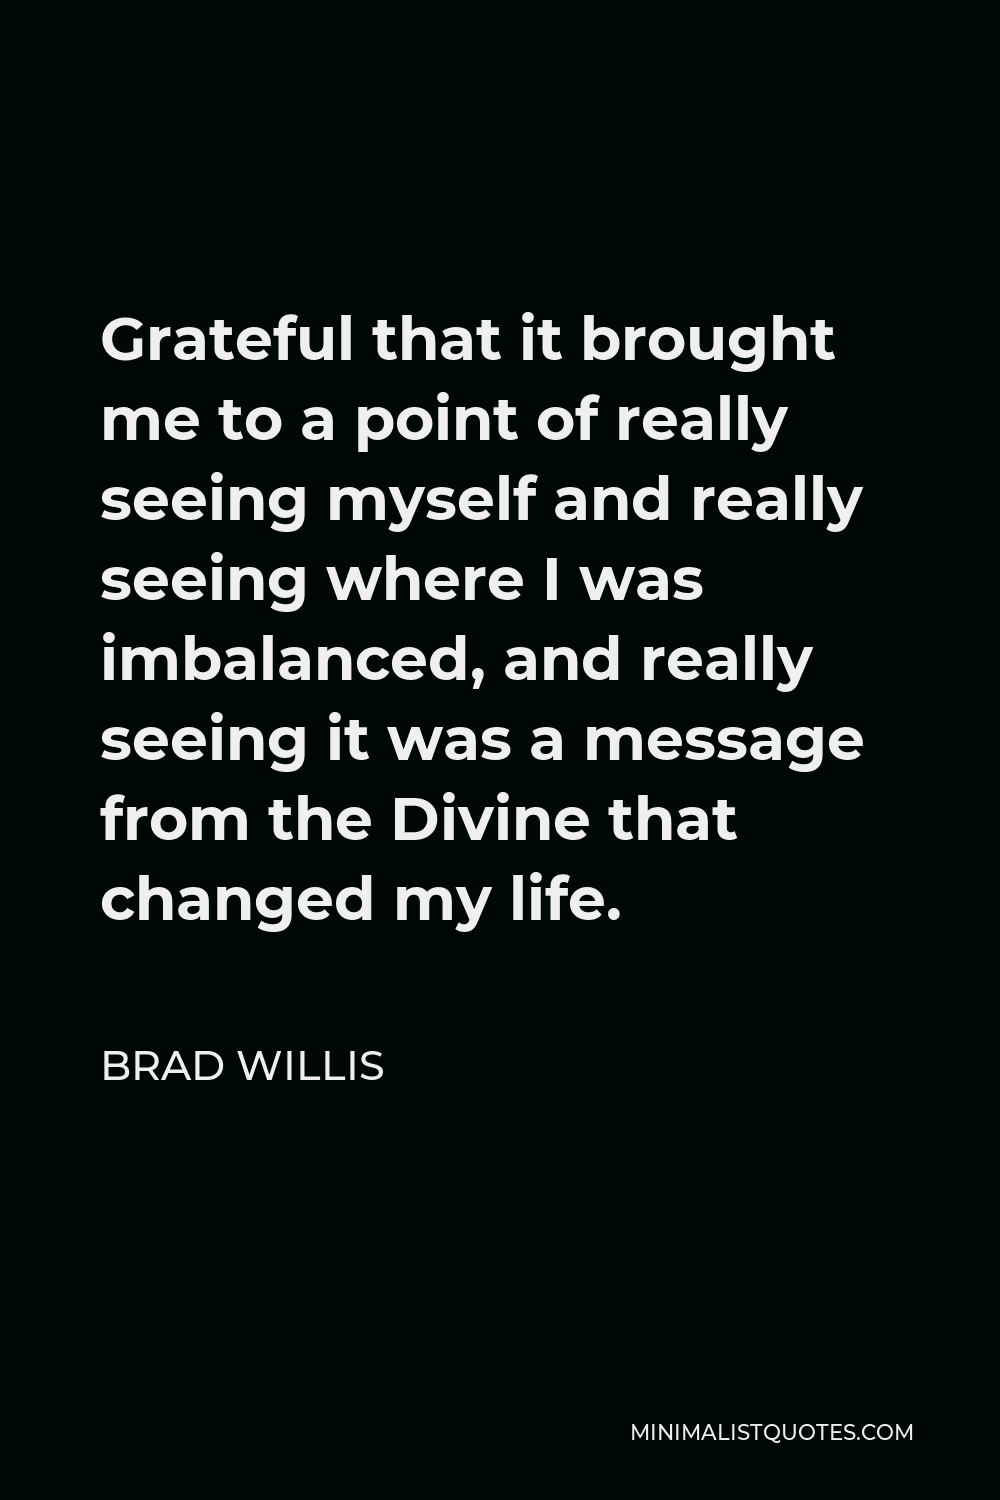 Brad Willis Quote - Grateful that it brought me to a point of really seeing myself and really seeing where I was imbalanced, and really seeing it was a message from the Divine that changed my life.